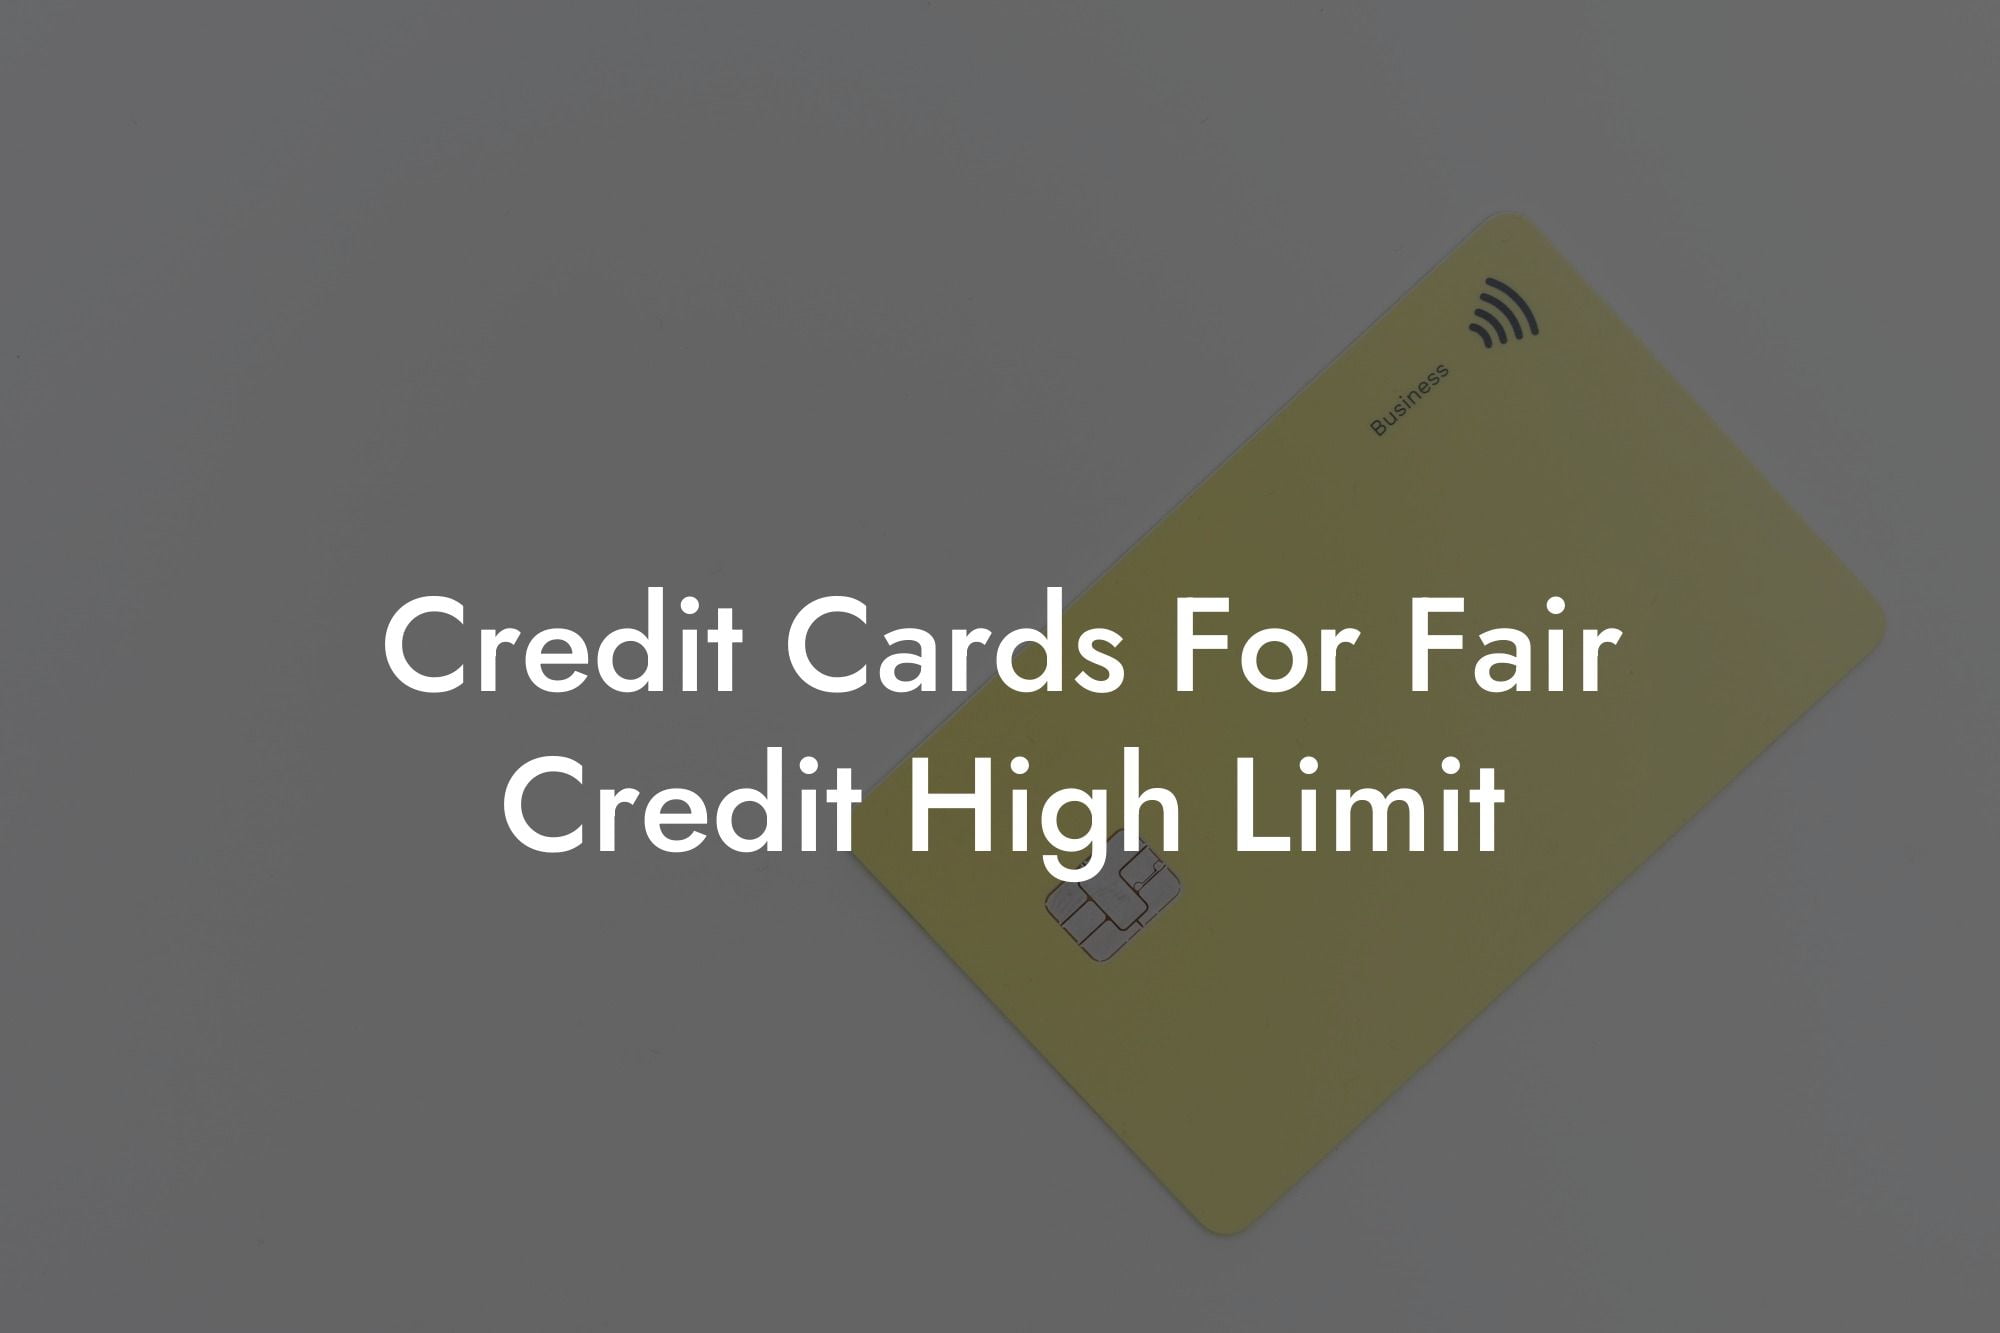 Credit Cards For Fair Credit High Limit